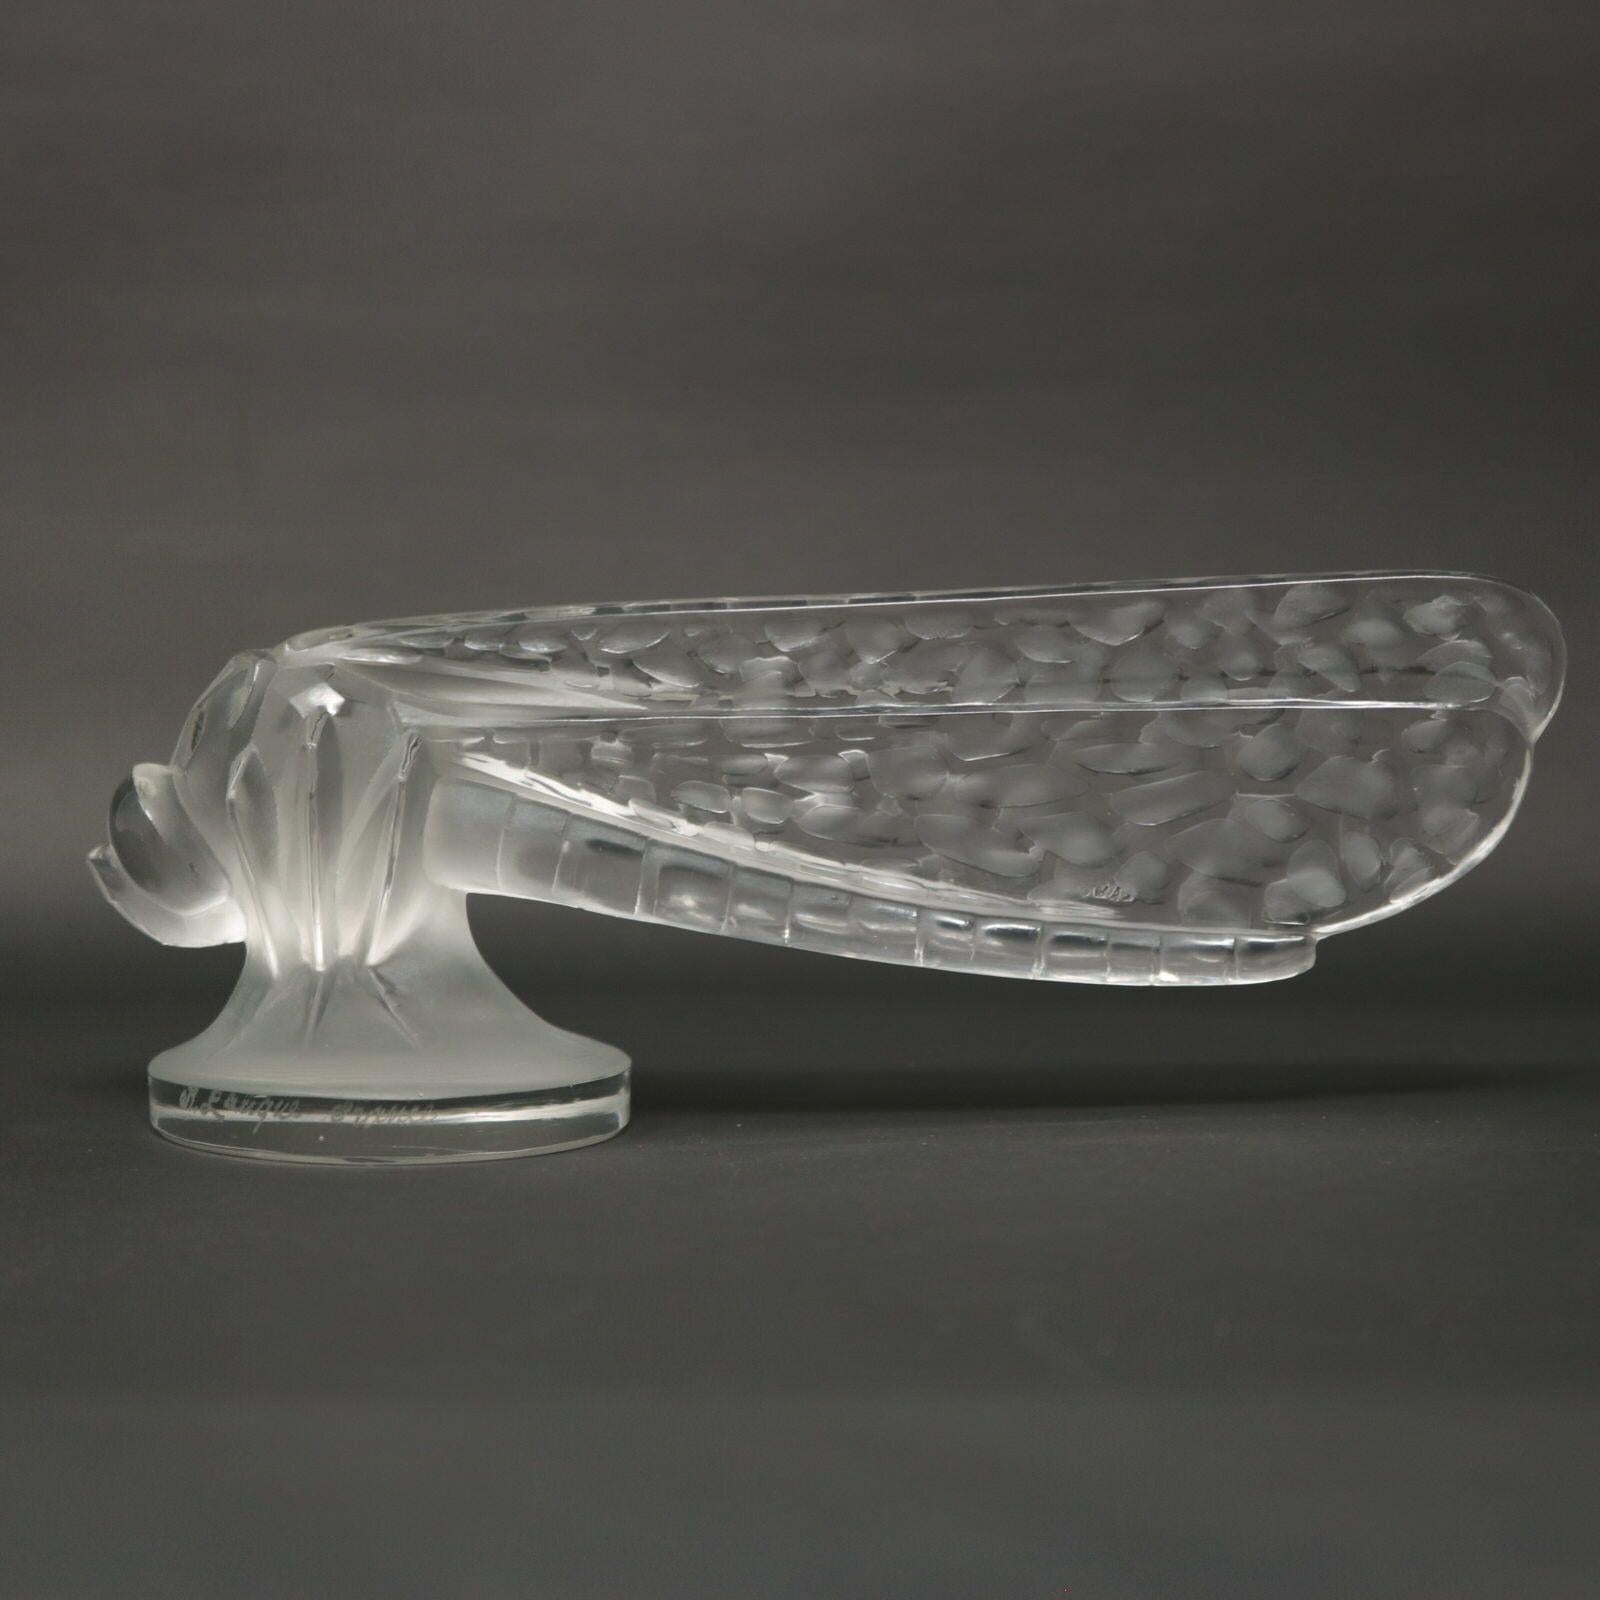 Rene Lalique clear and frosted glass 'Petite Libellule' car mascot (radiator cap). Features a dragonfly sitting with wings closed. Engraved makers mark, 'R Lalique France' to the side rim of the base. Moulded, 'LALIQUE' to the wing. Book reference: